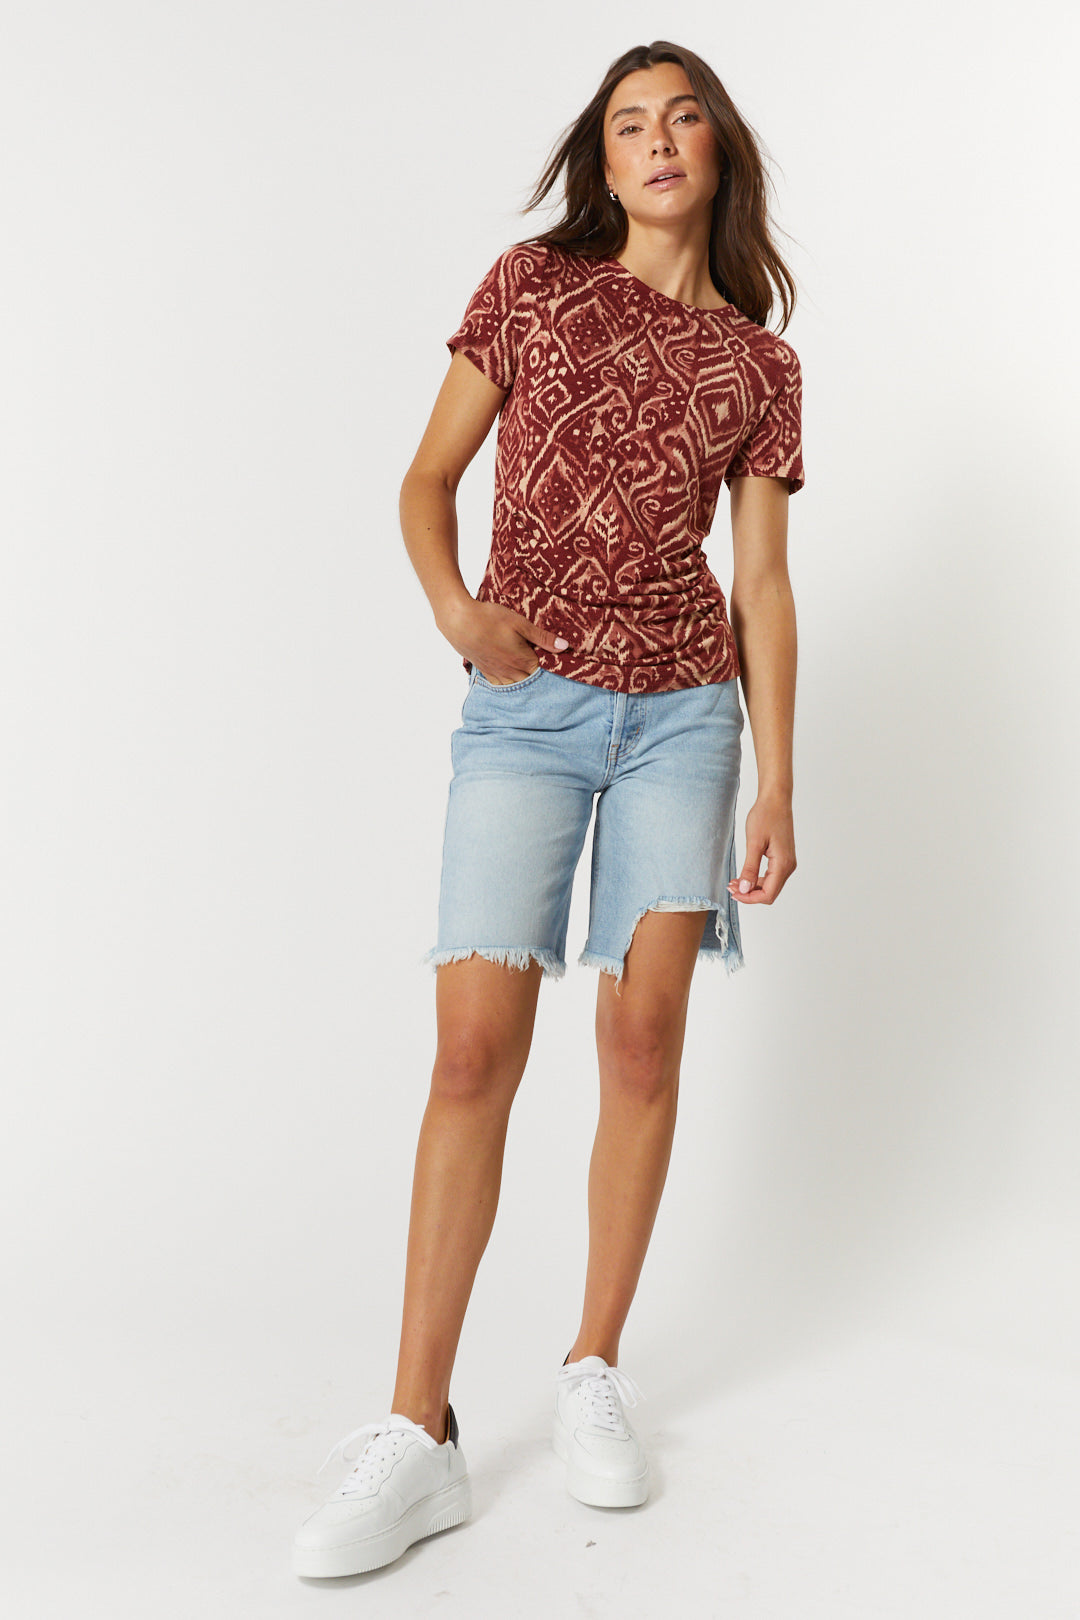 Patterned fitted red t-shirt | Della